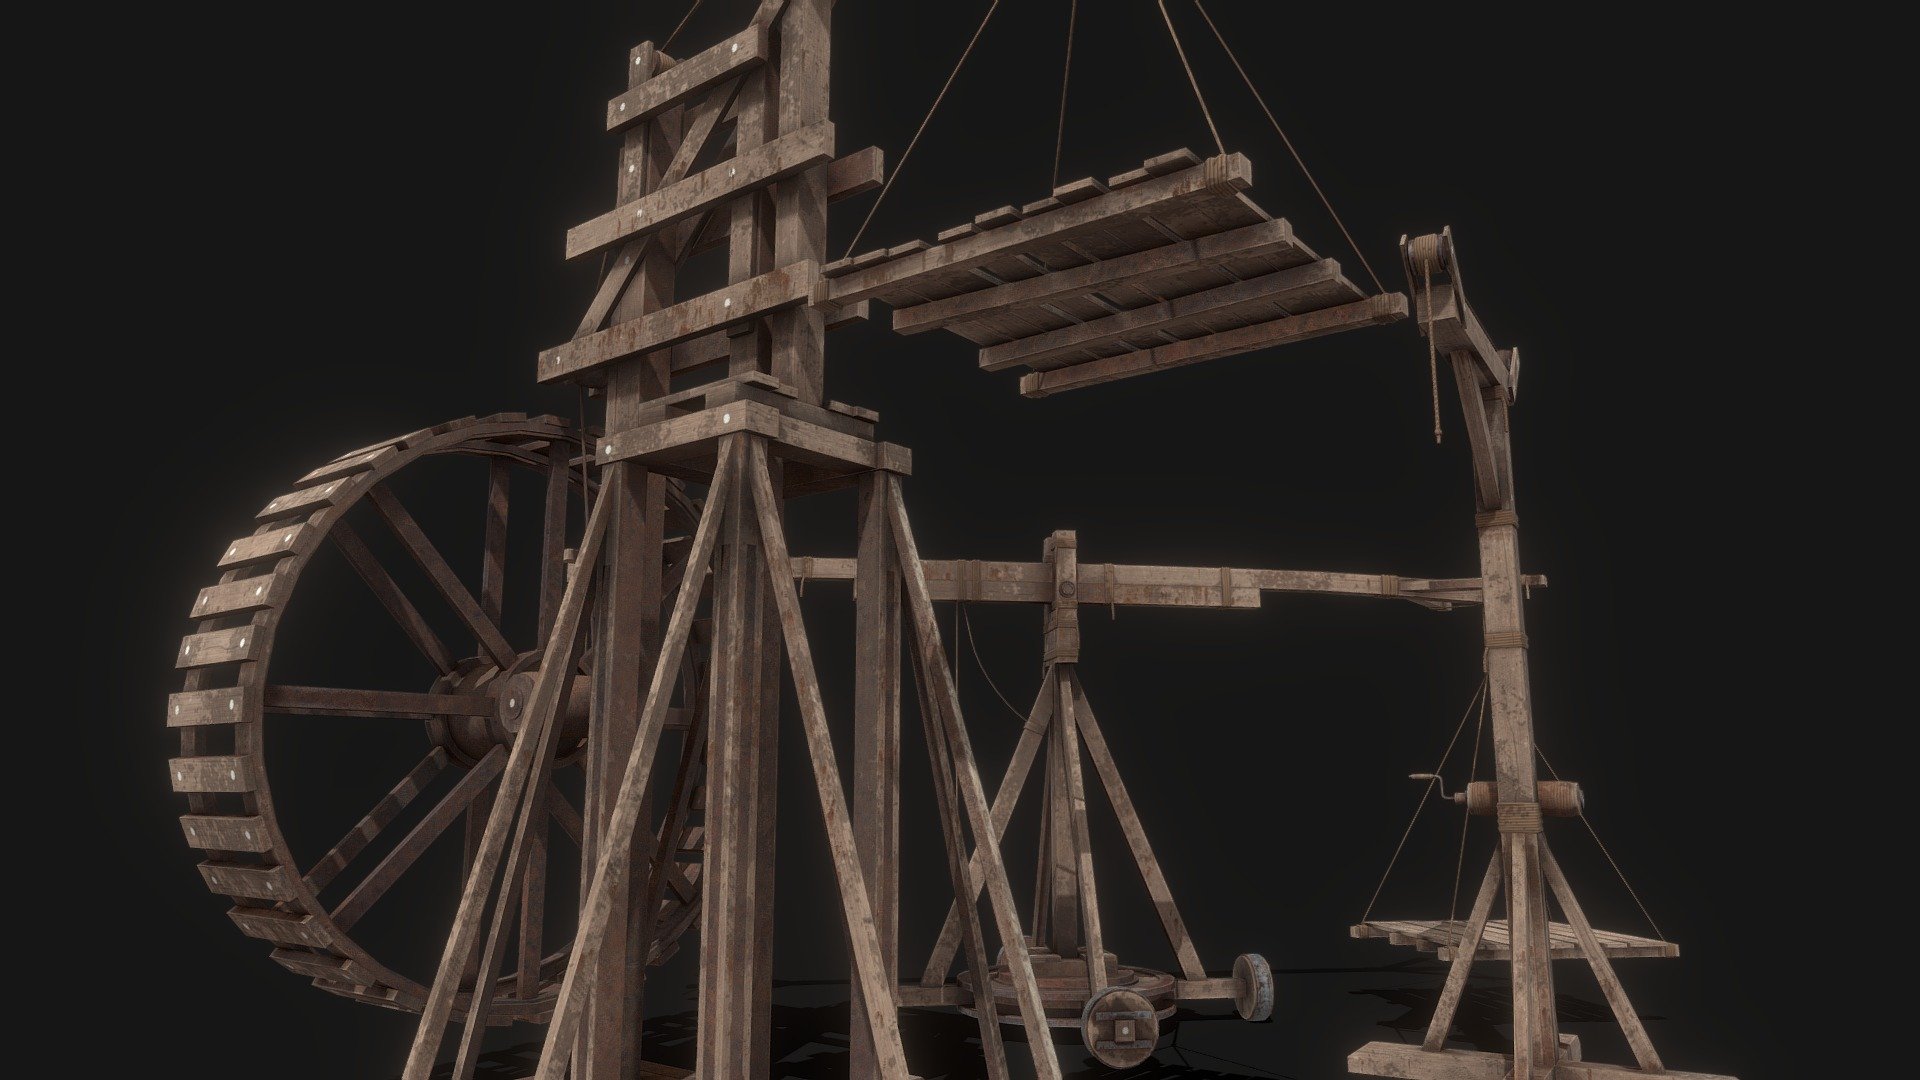 Realistic Medieval Cranes!

Designed for games in Low-poly PBR including Albedo, Normal, Metallic, AO, and Roughness 4K textures.
All models in scene share one 4K Texture map.

This model from Ferocious Industries can be found in 3 different material skins, and this one uses the ‘Used’ texture set.

Triangles -

Hanging Pallet: 856
Saw Crane: 7828
Dock Crane: 2512
Treadwheel Crane: 5060 - PBR Medieval Cranes - Buy Royalty Free 3D model by Ferocious Industries (@ferociousindustries.matthias) 3d model